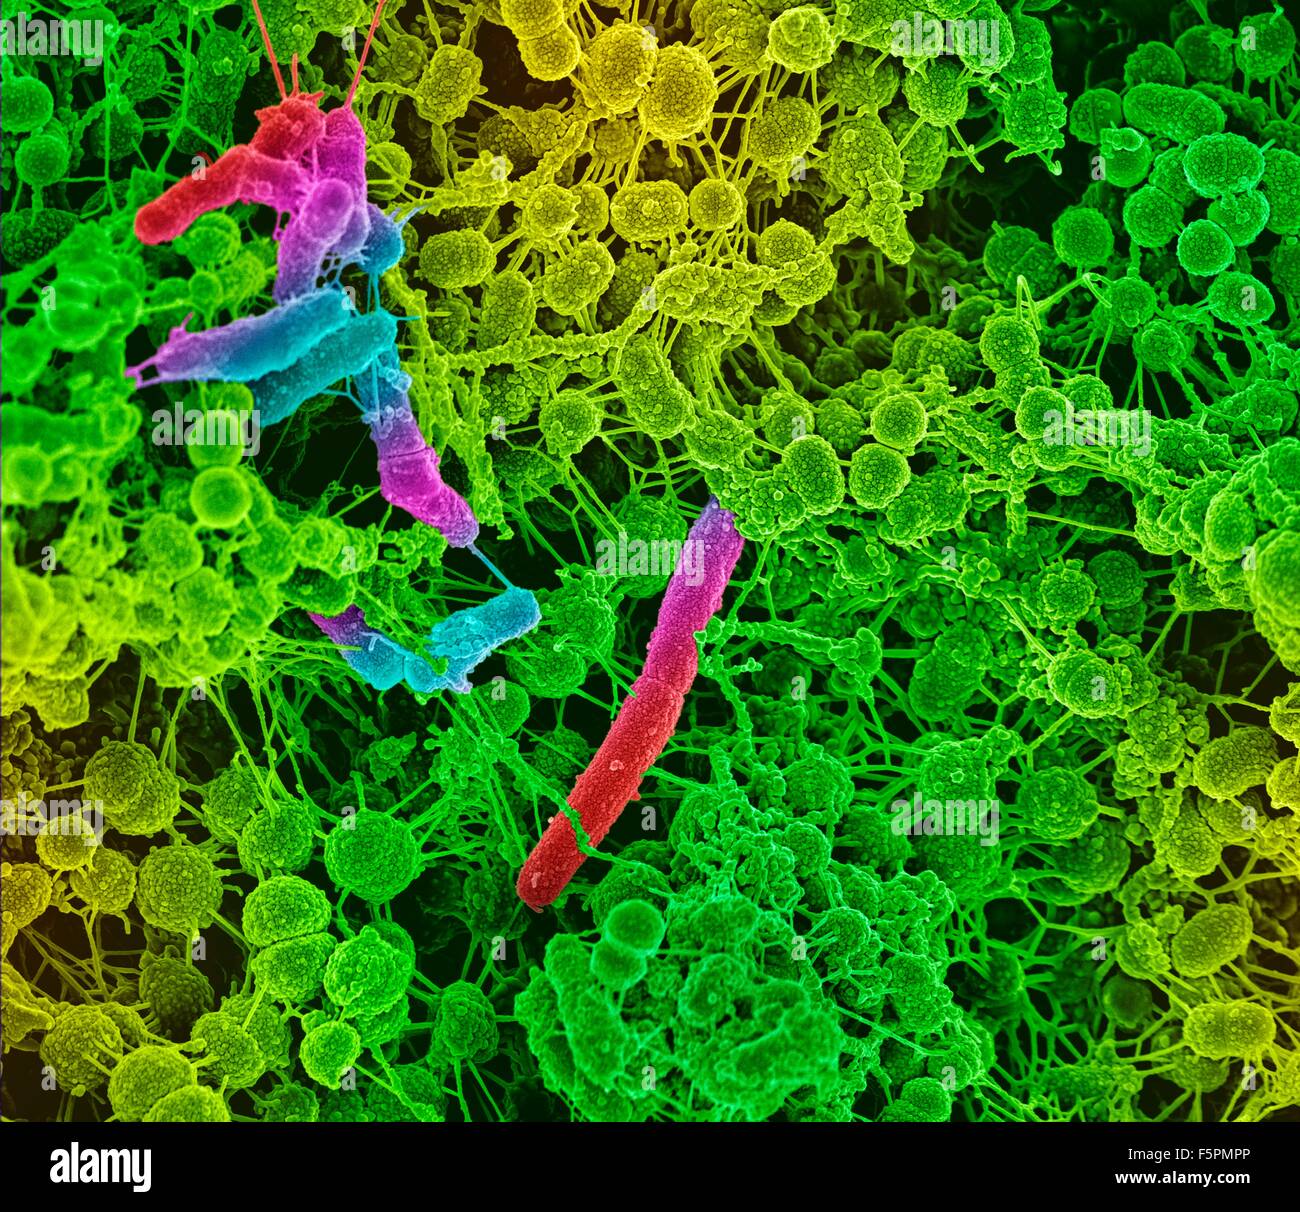 Oral bacteria. Coloured scanning electron micrograph (SEM) of mixed oral bacteria (Streptococcus, round) and bacilli bacteria, Stock Photo